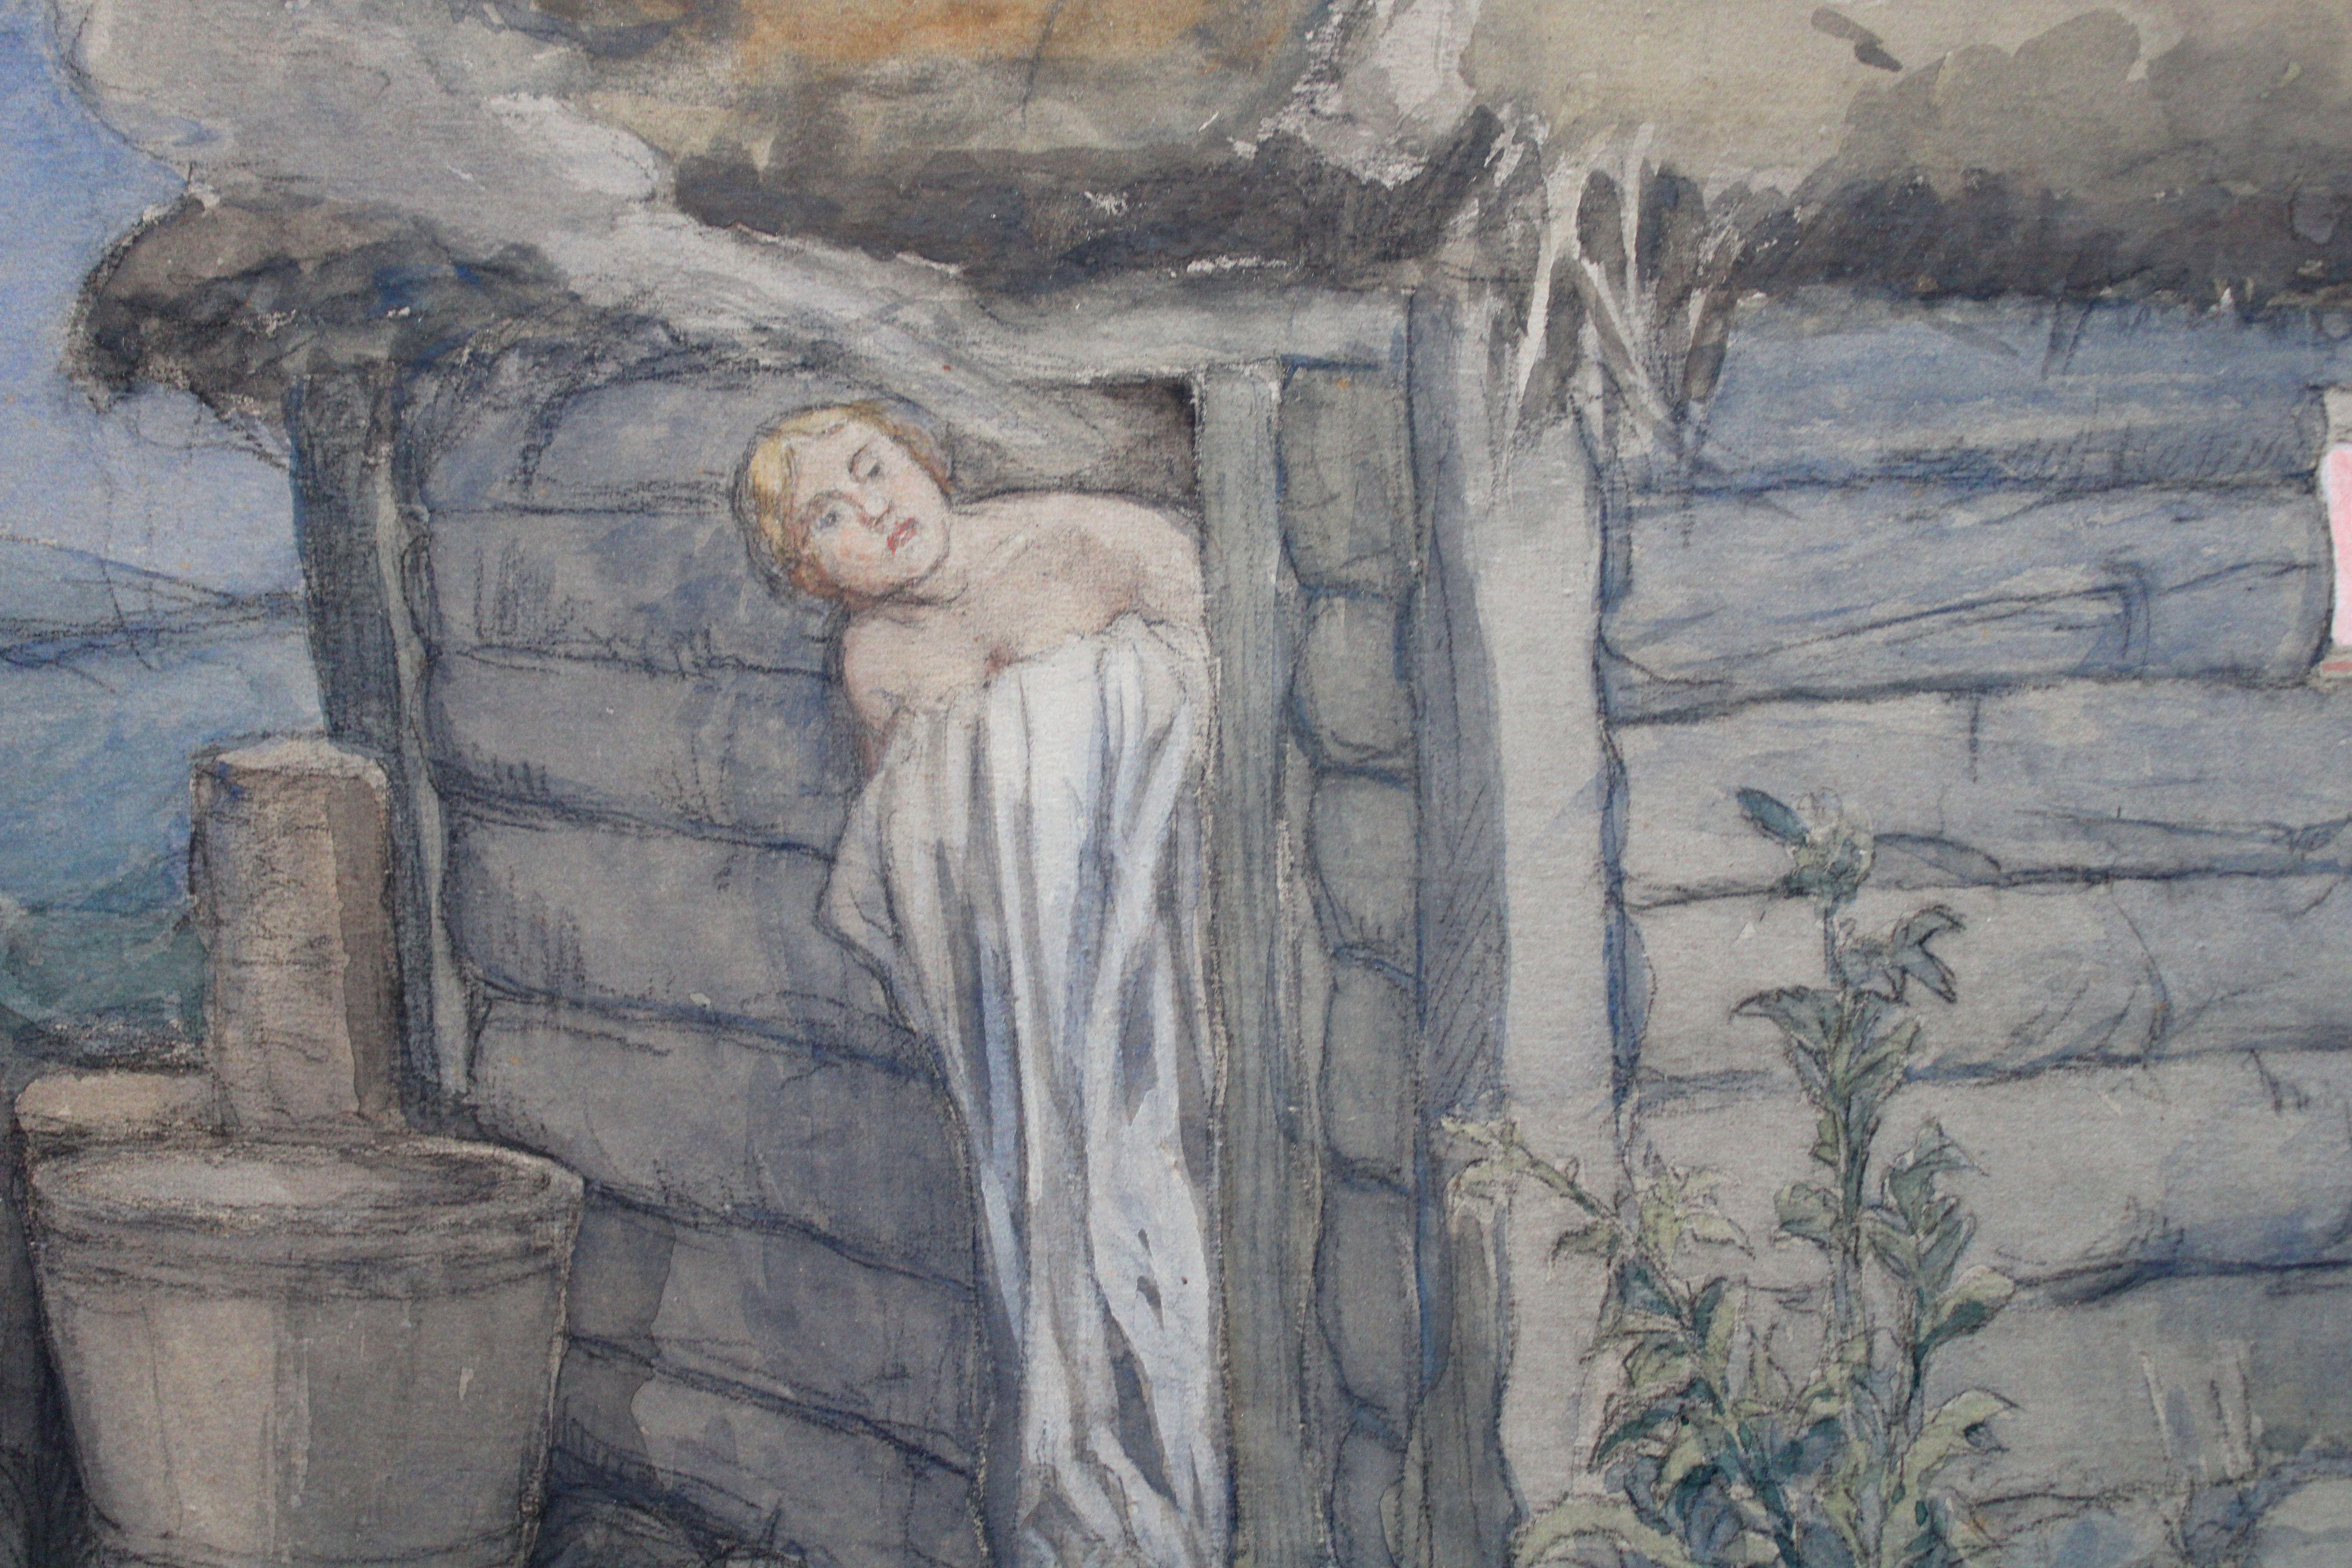 By the bath. watercolor on paper, 48, 5x58, 5 cm - Gray Figurative Painting by Indrikis Zeberins 